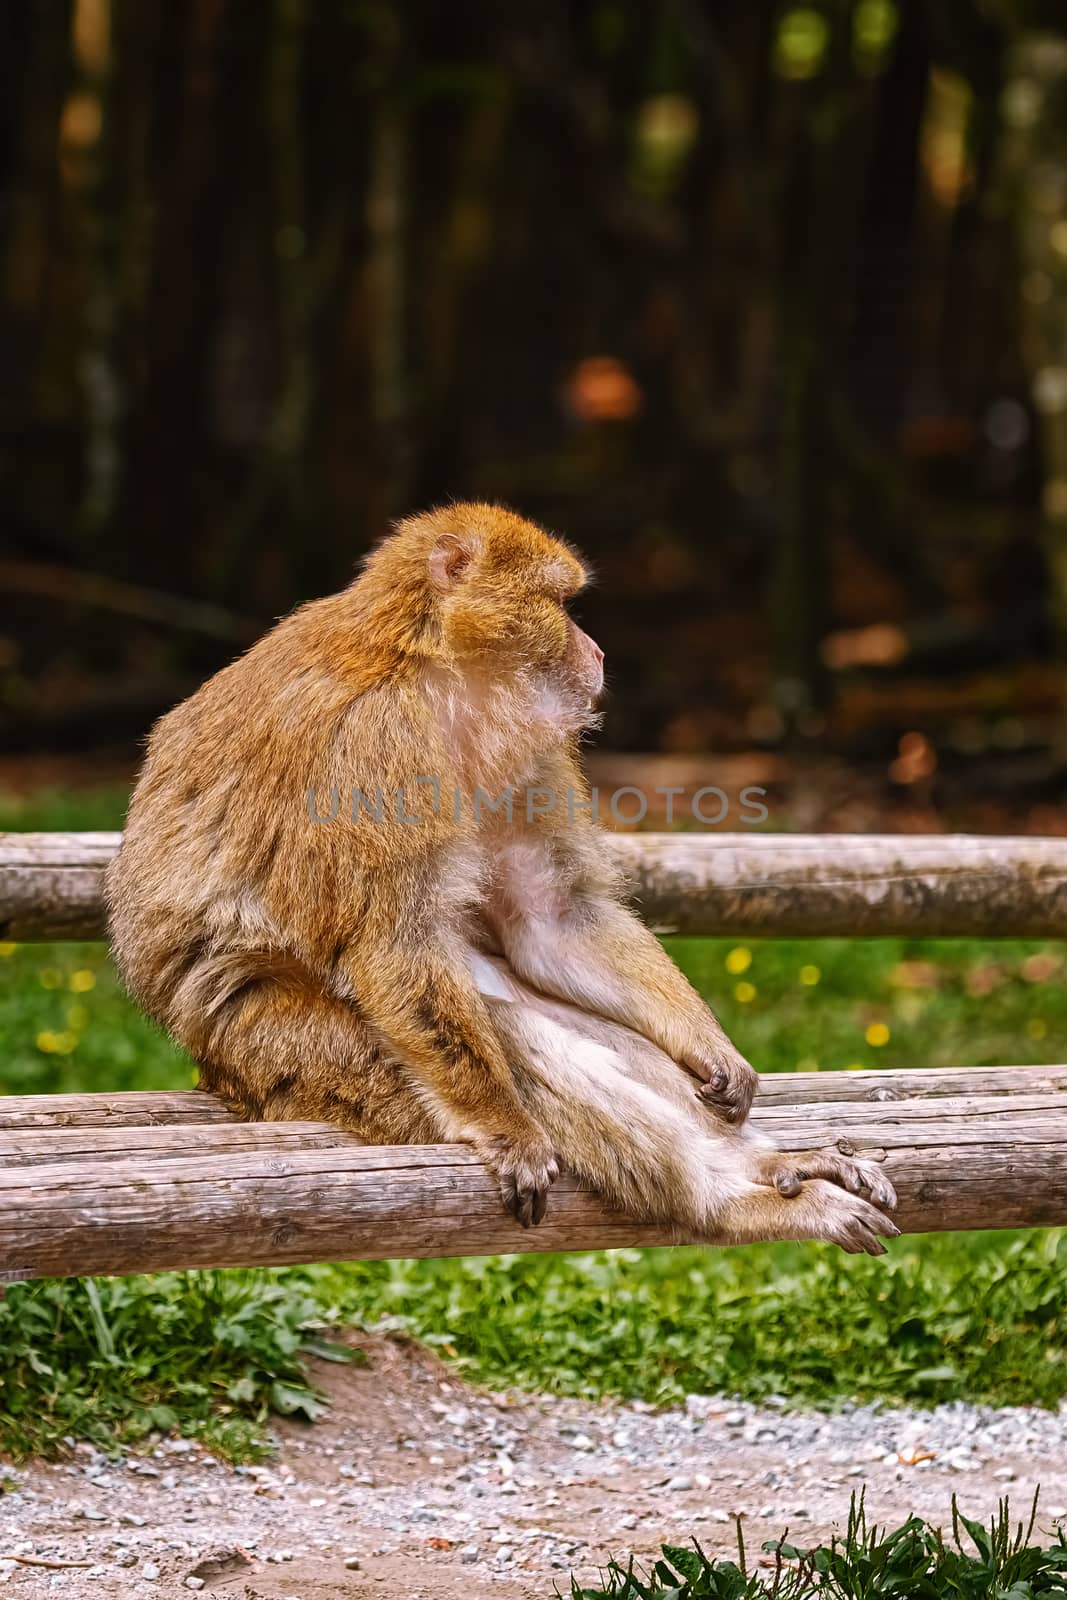 Barbary Macaque (Macaca Sylvanus) Sitting on the Bench